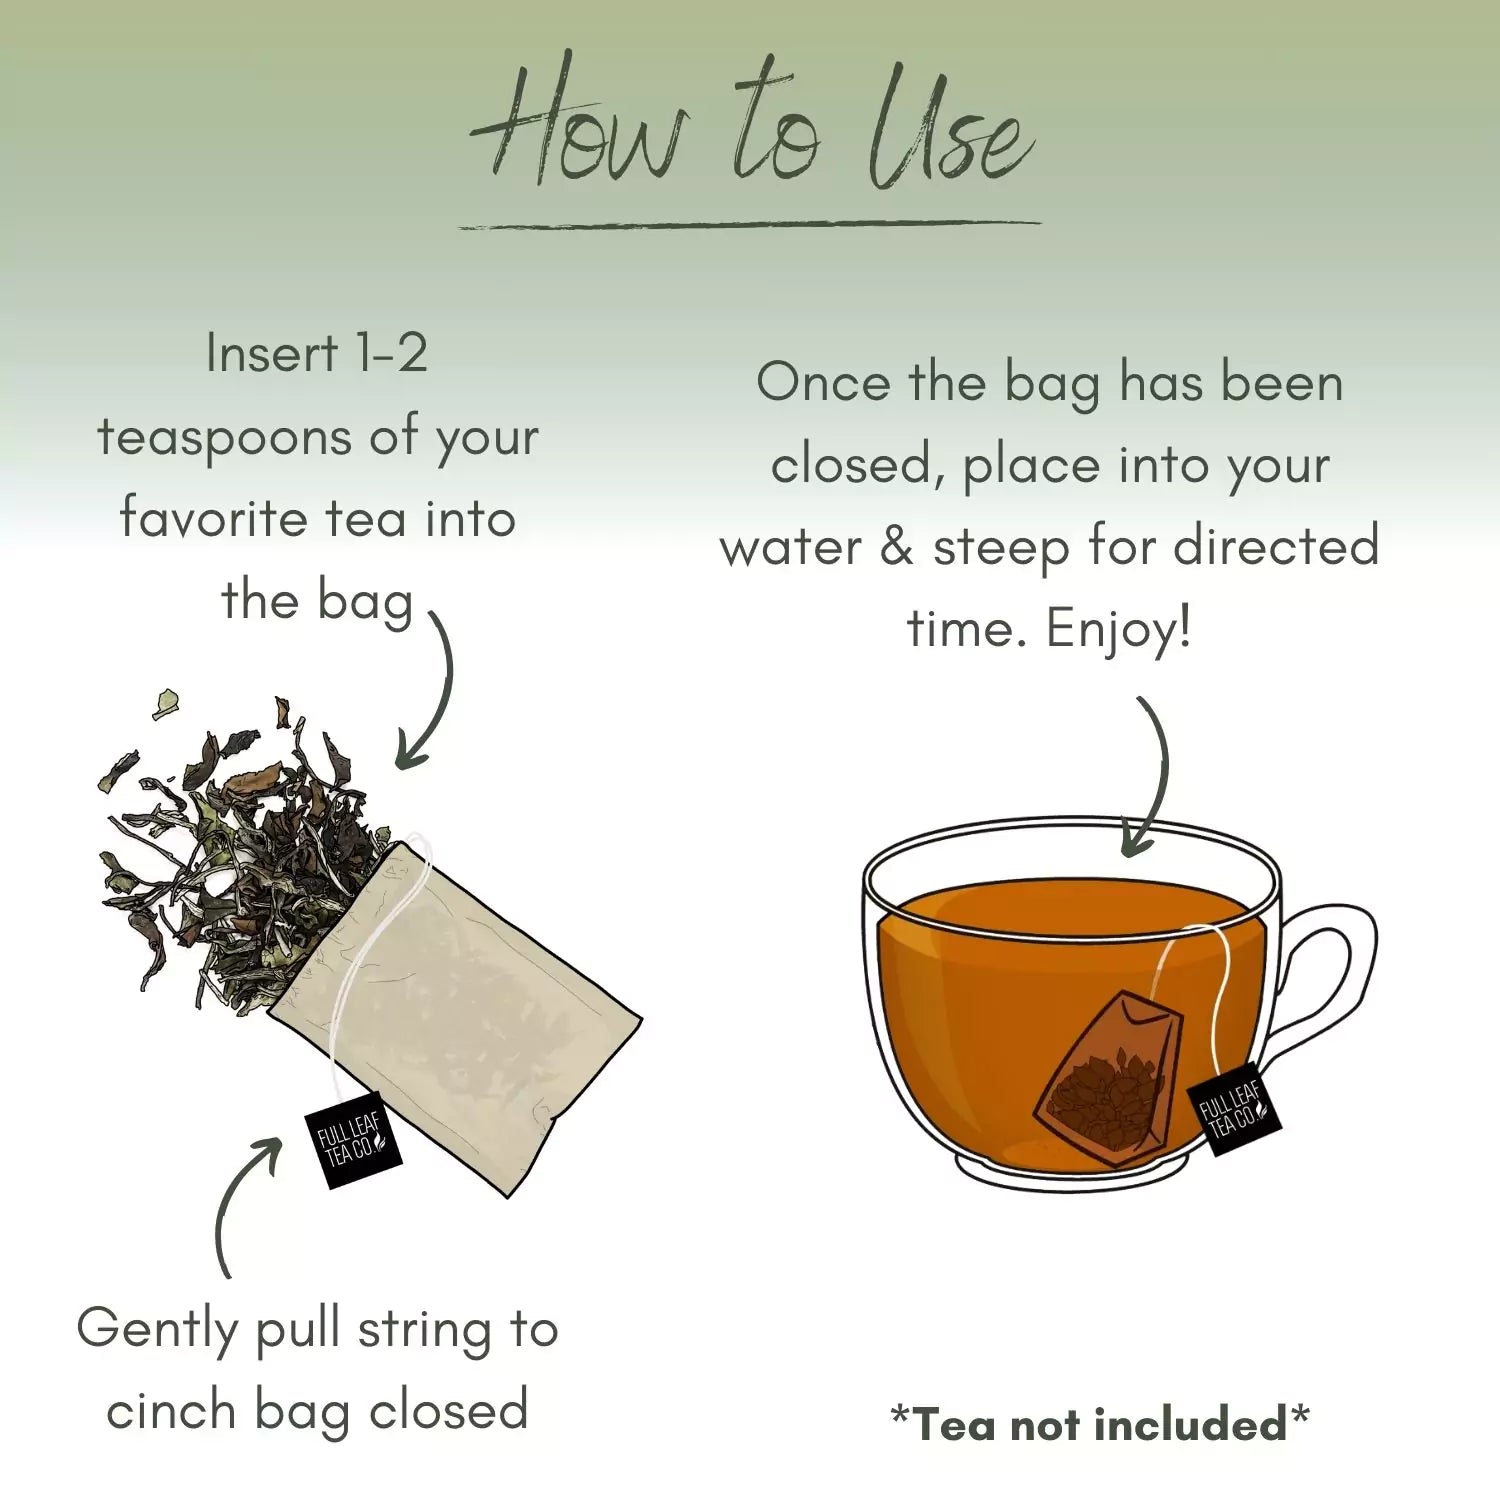 Illustration showing how to use a tea bag. First, insert 1-2 teaspoons of your favorite tea into the bag. Gently pull the string to cinch the bag closed. Then, place the bag into your water and steep for the directed time. Enjoy! Tea not included.